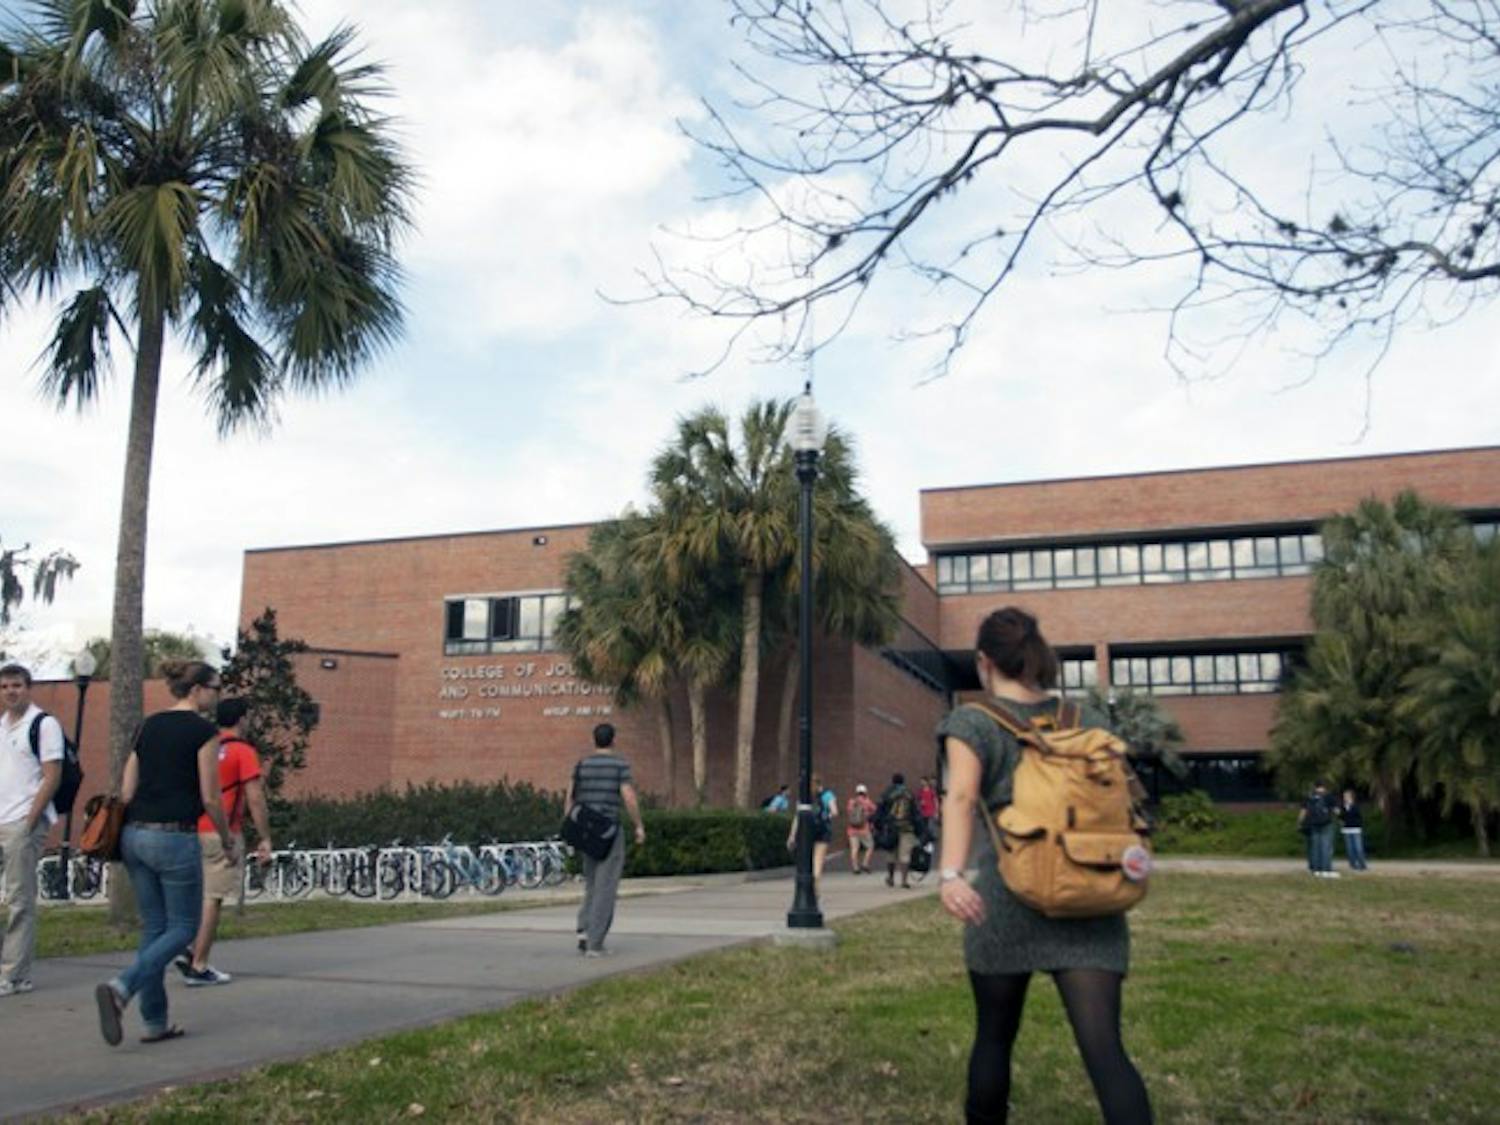 UF's College of Journalism and Communications.